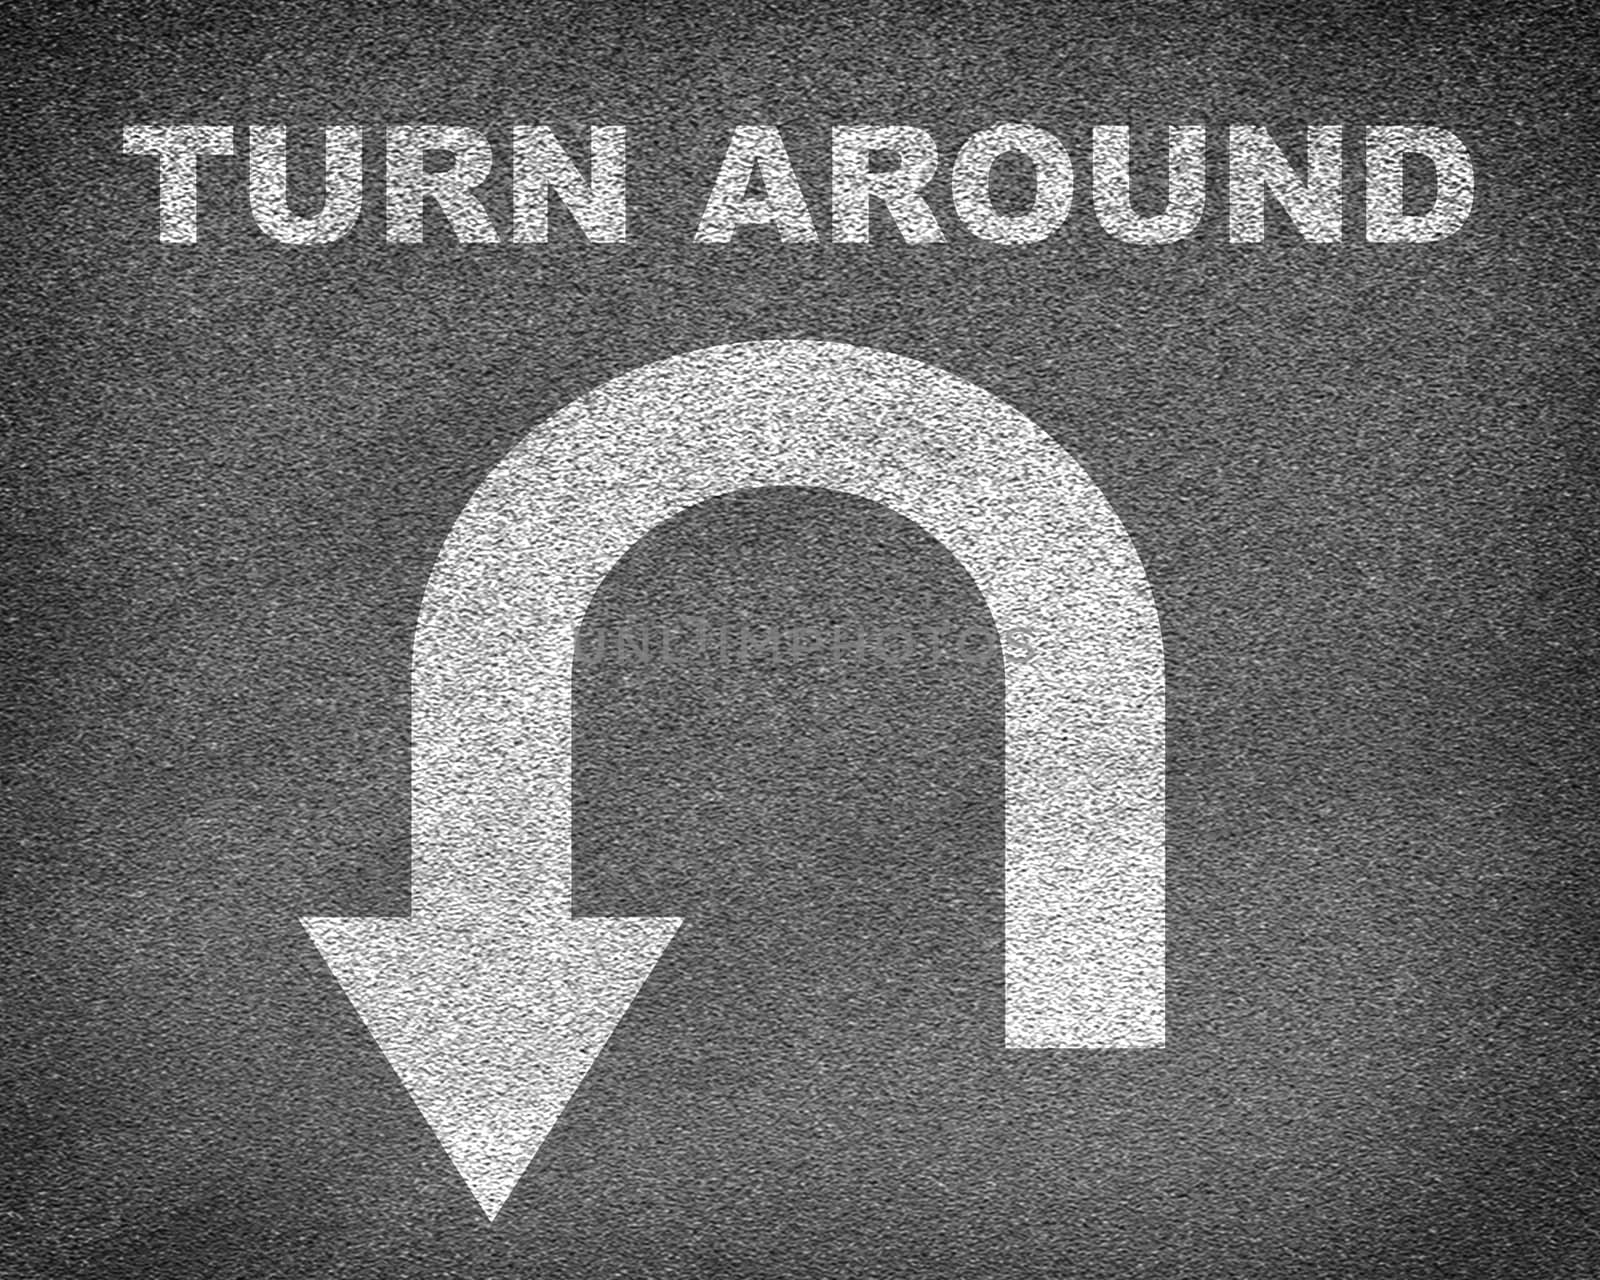 Asphalt road texture with U-turn sign and text turn around. Business concept